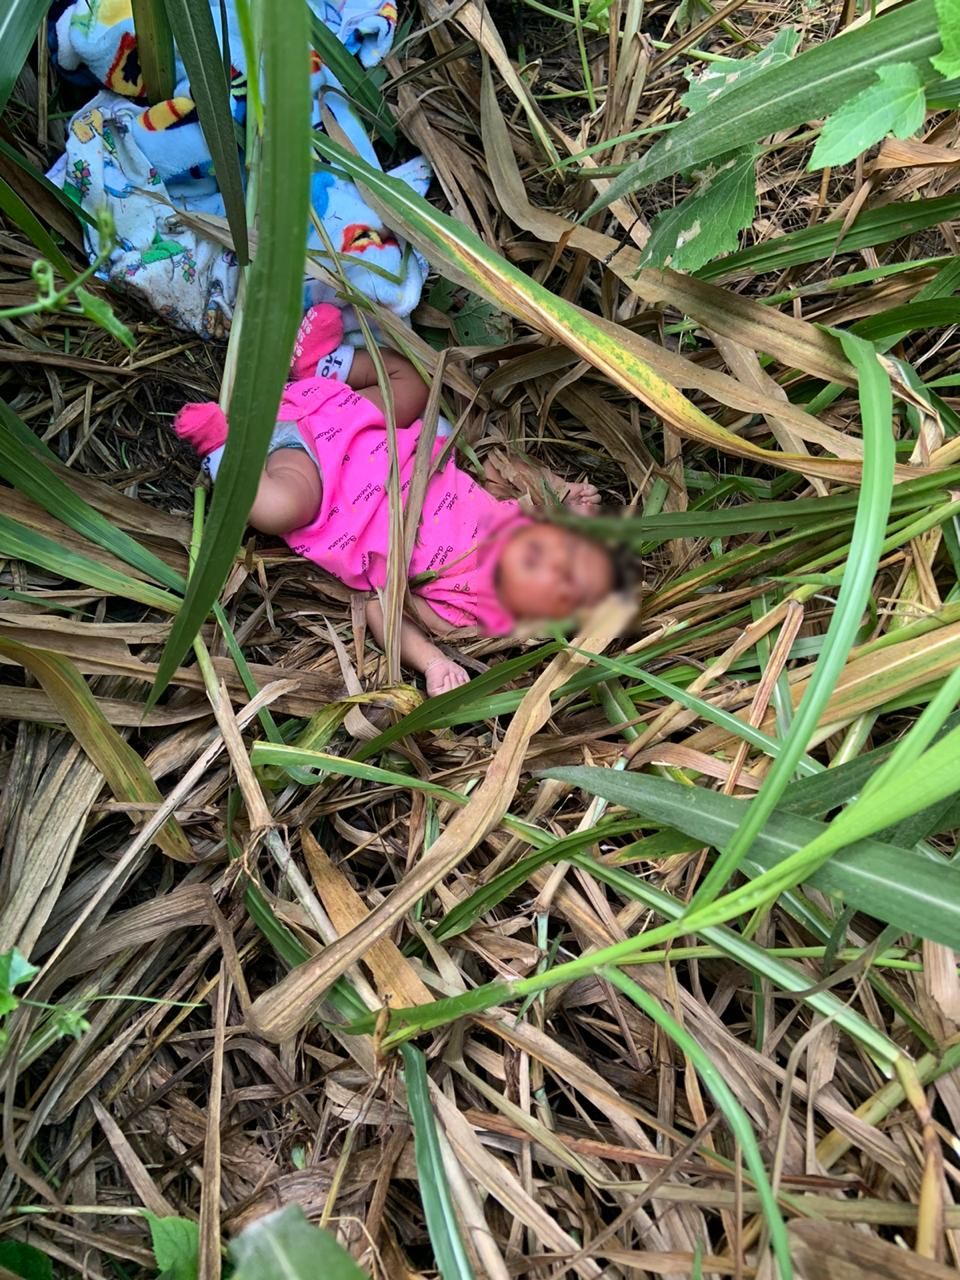 UPDATE: Officers rescue baby found abandoned in bushes in Freeport